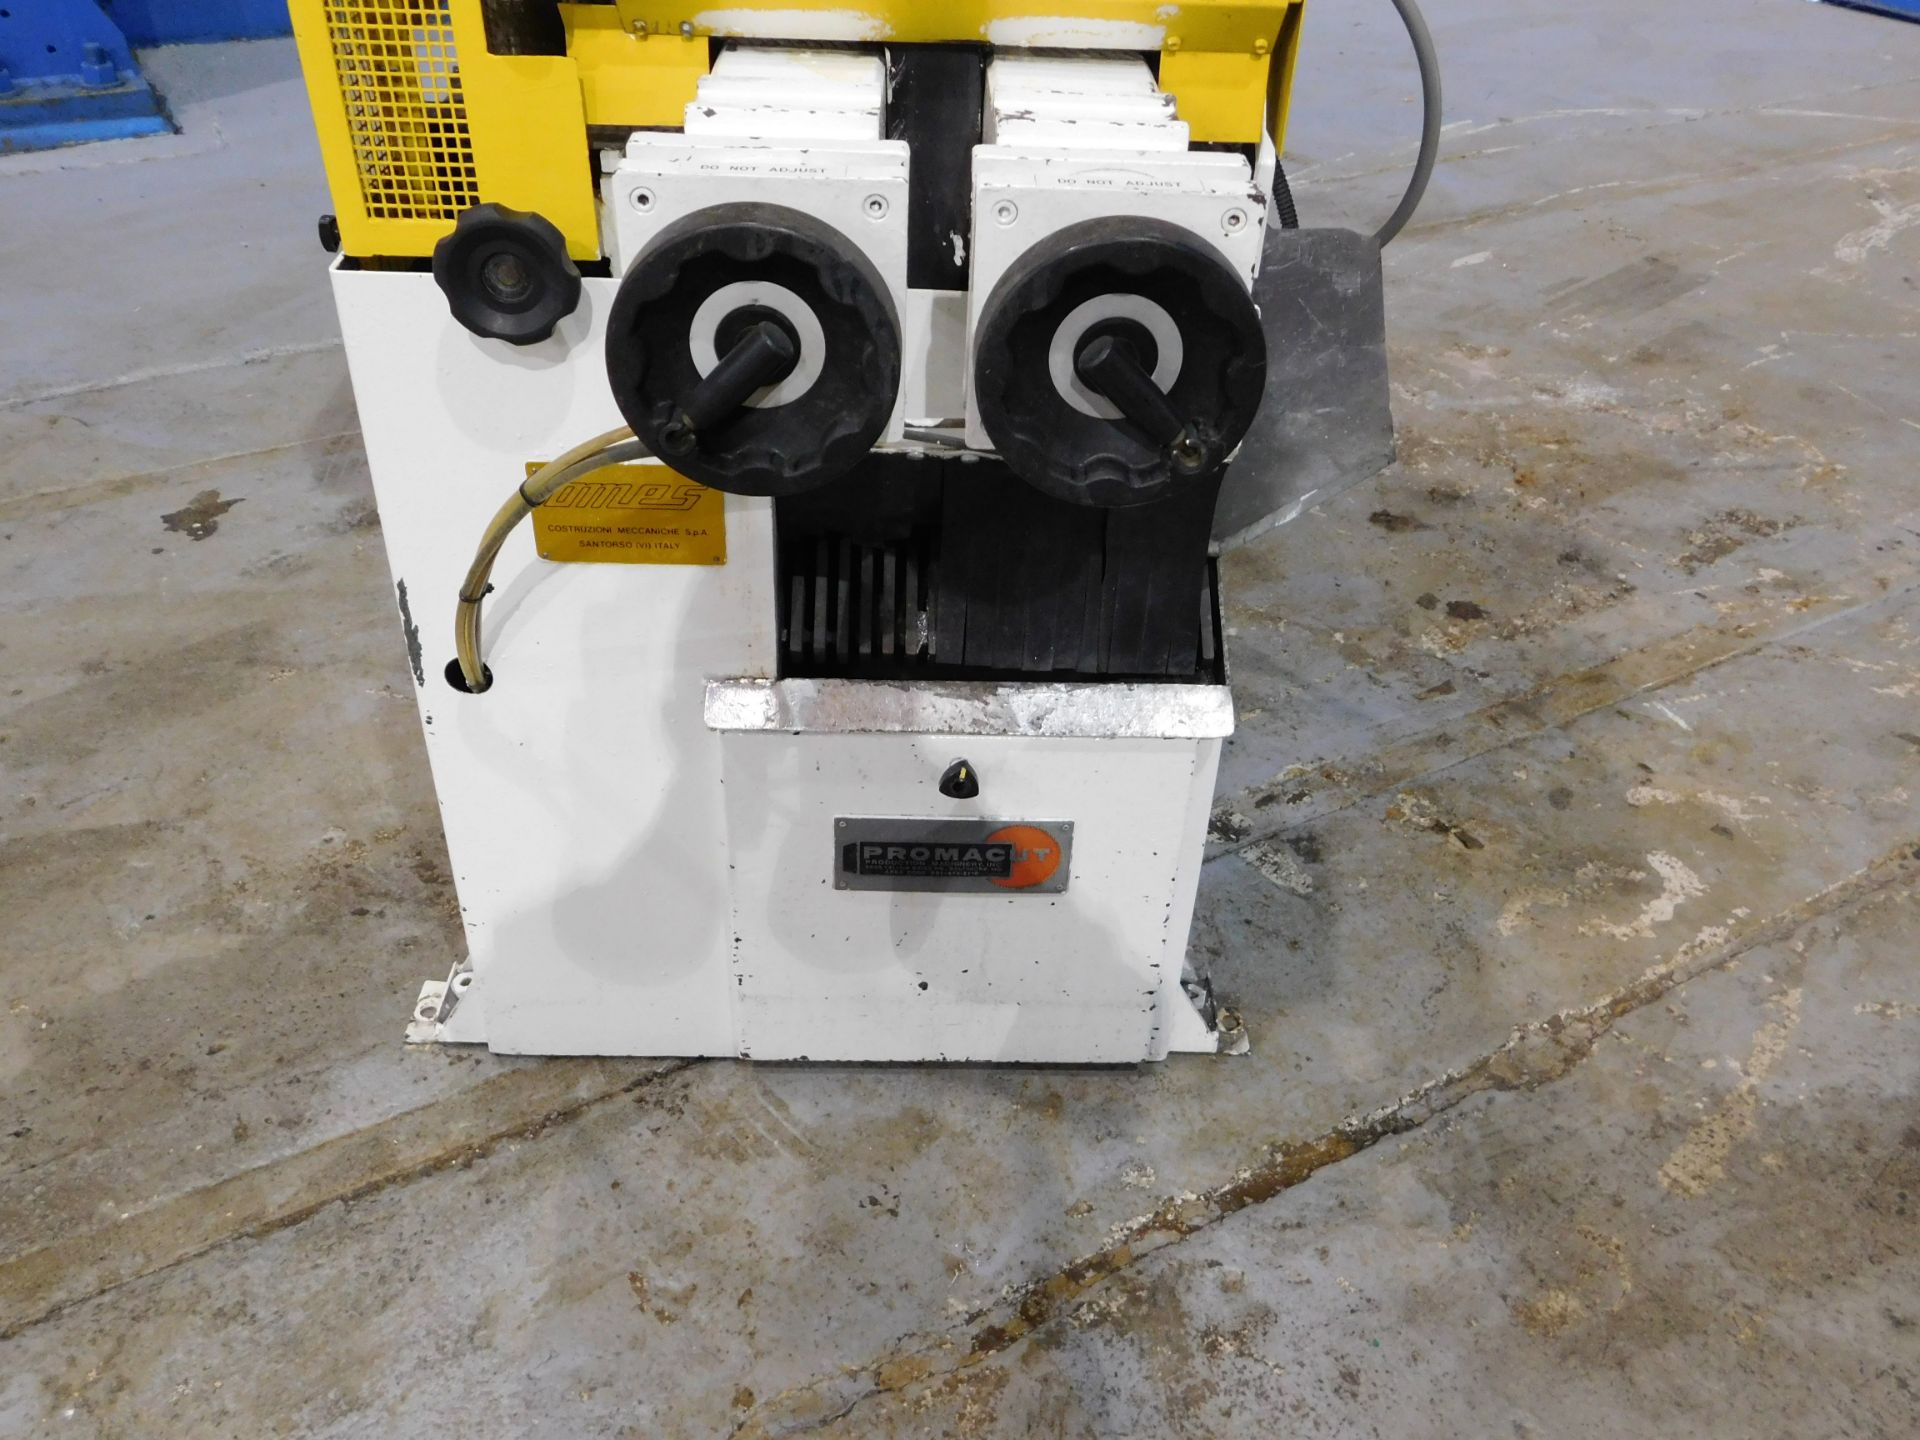 Omes Promacut Semi-Automatic Cold Saw, 14", Mdl: Tramatic 370A (7050P) (Located In Painesville, OH) - Image 8 of 10